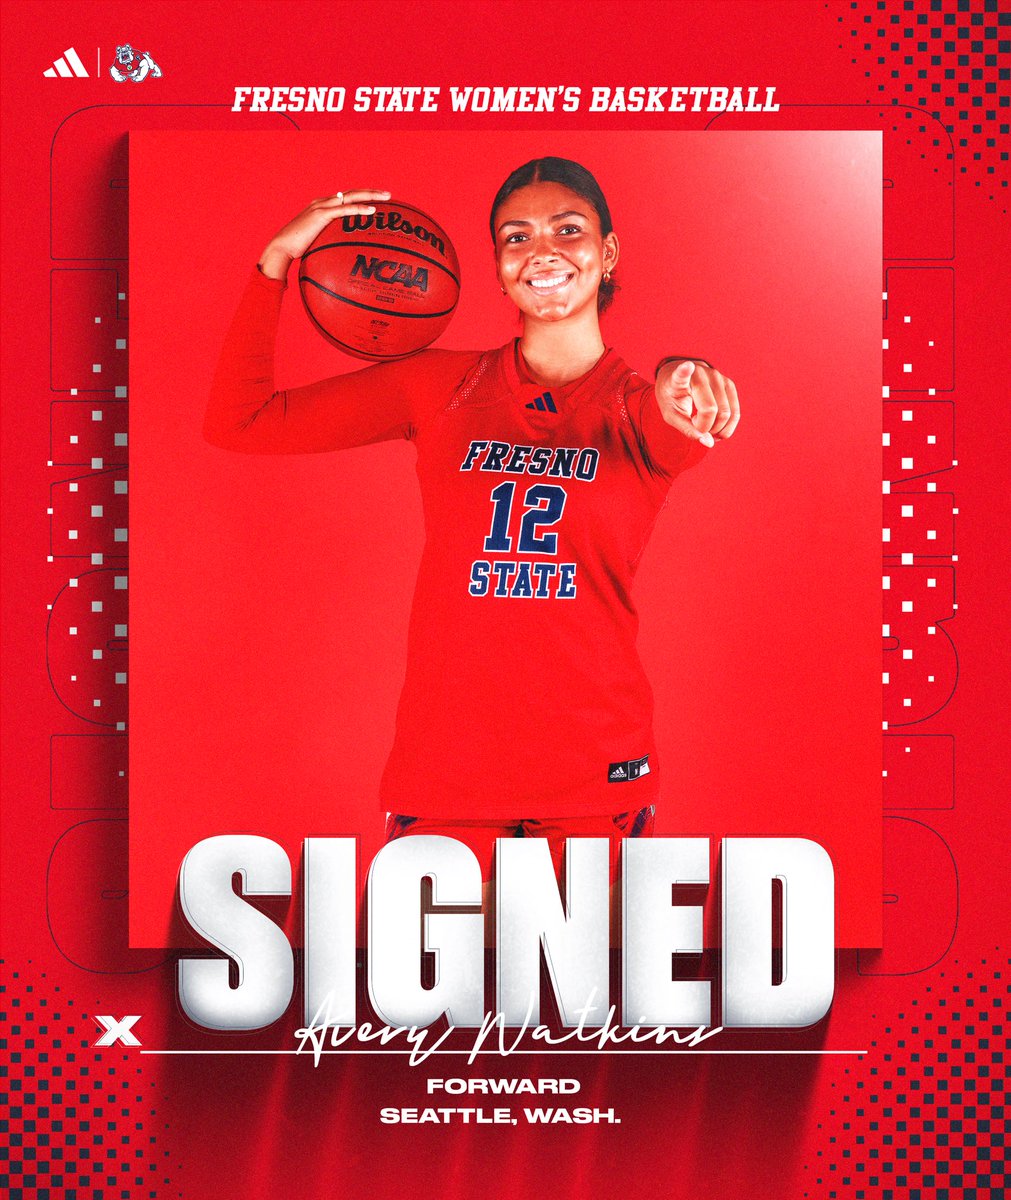 𝙎𝙄𝙂𝙉𝙀𝘿 🖊️ It's official, welcome to the Bulldog family Avery! 🐾